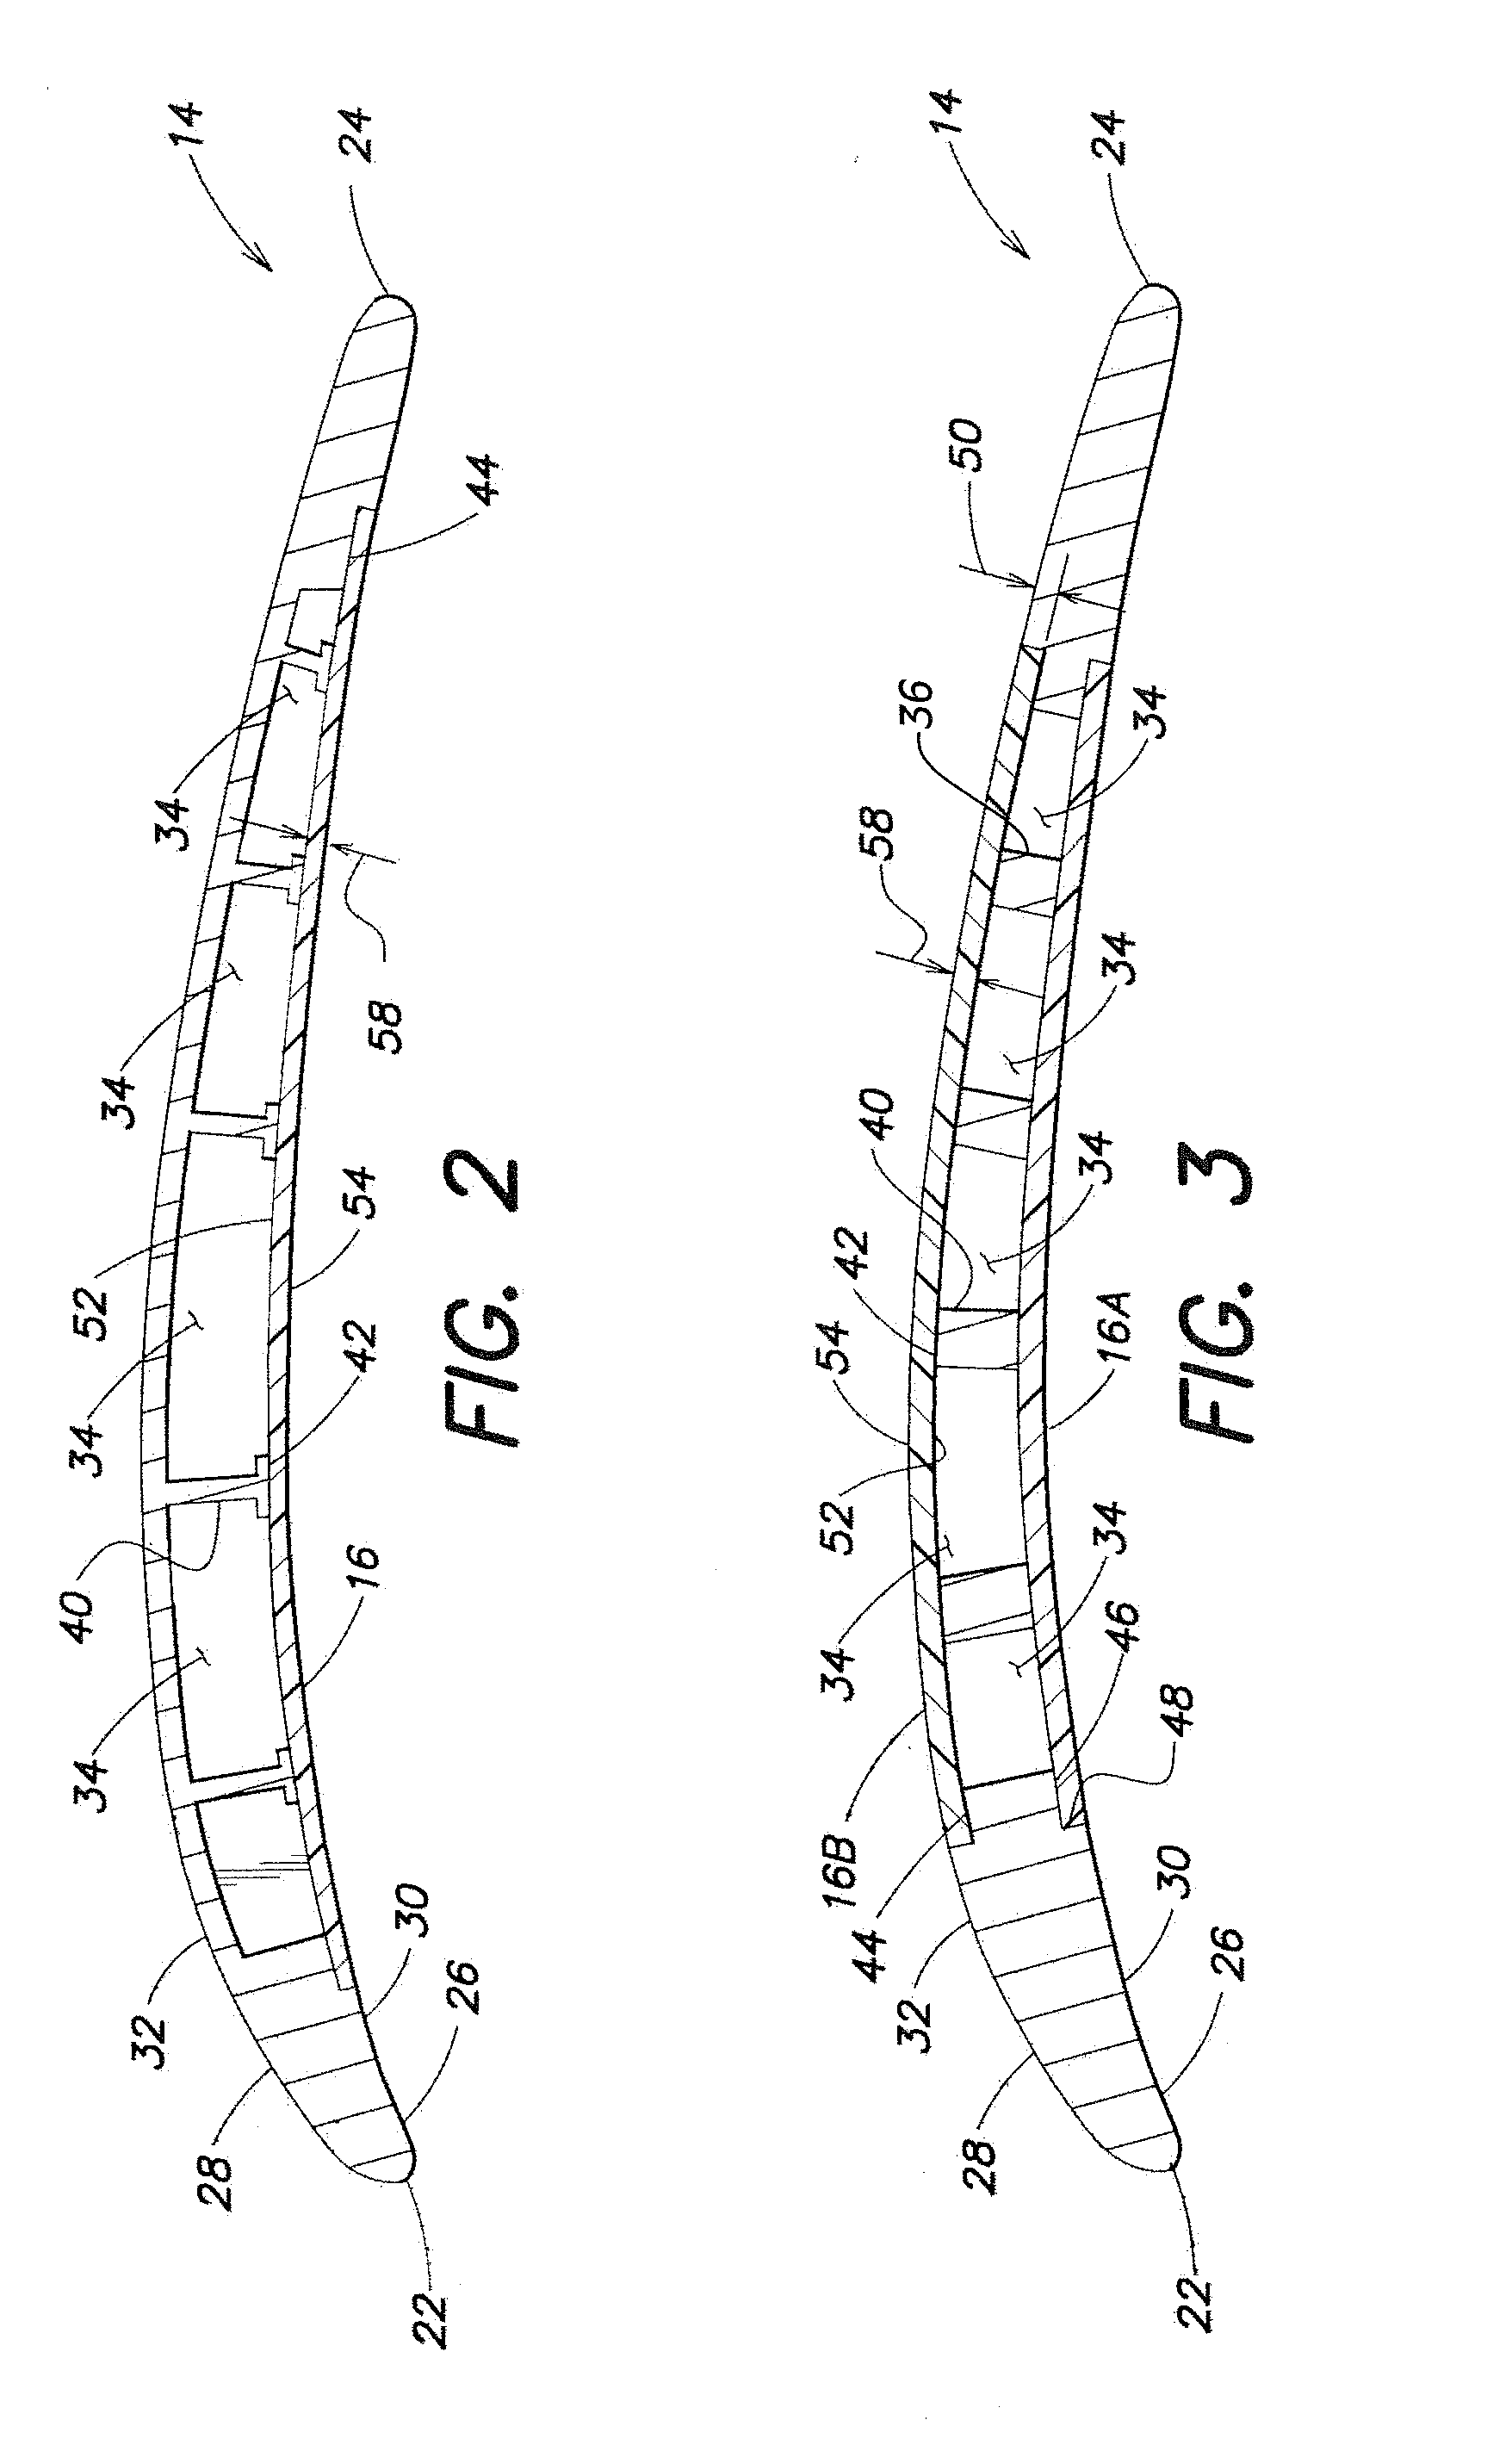 Hybrid structure airfoil